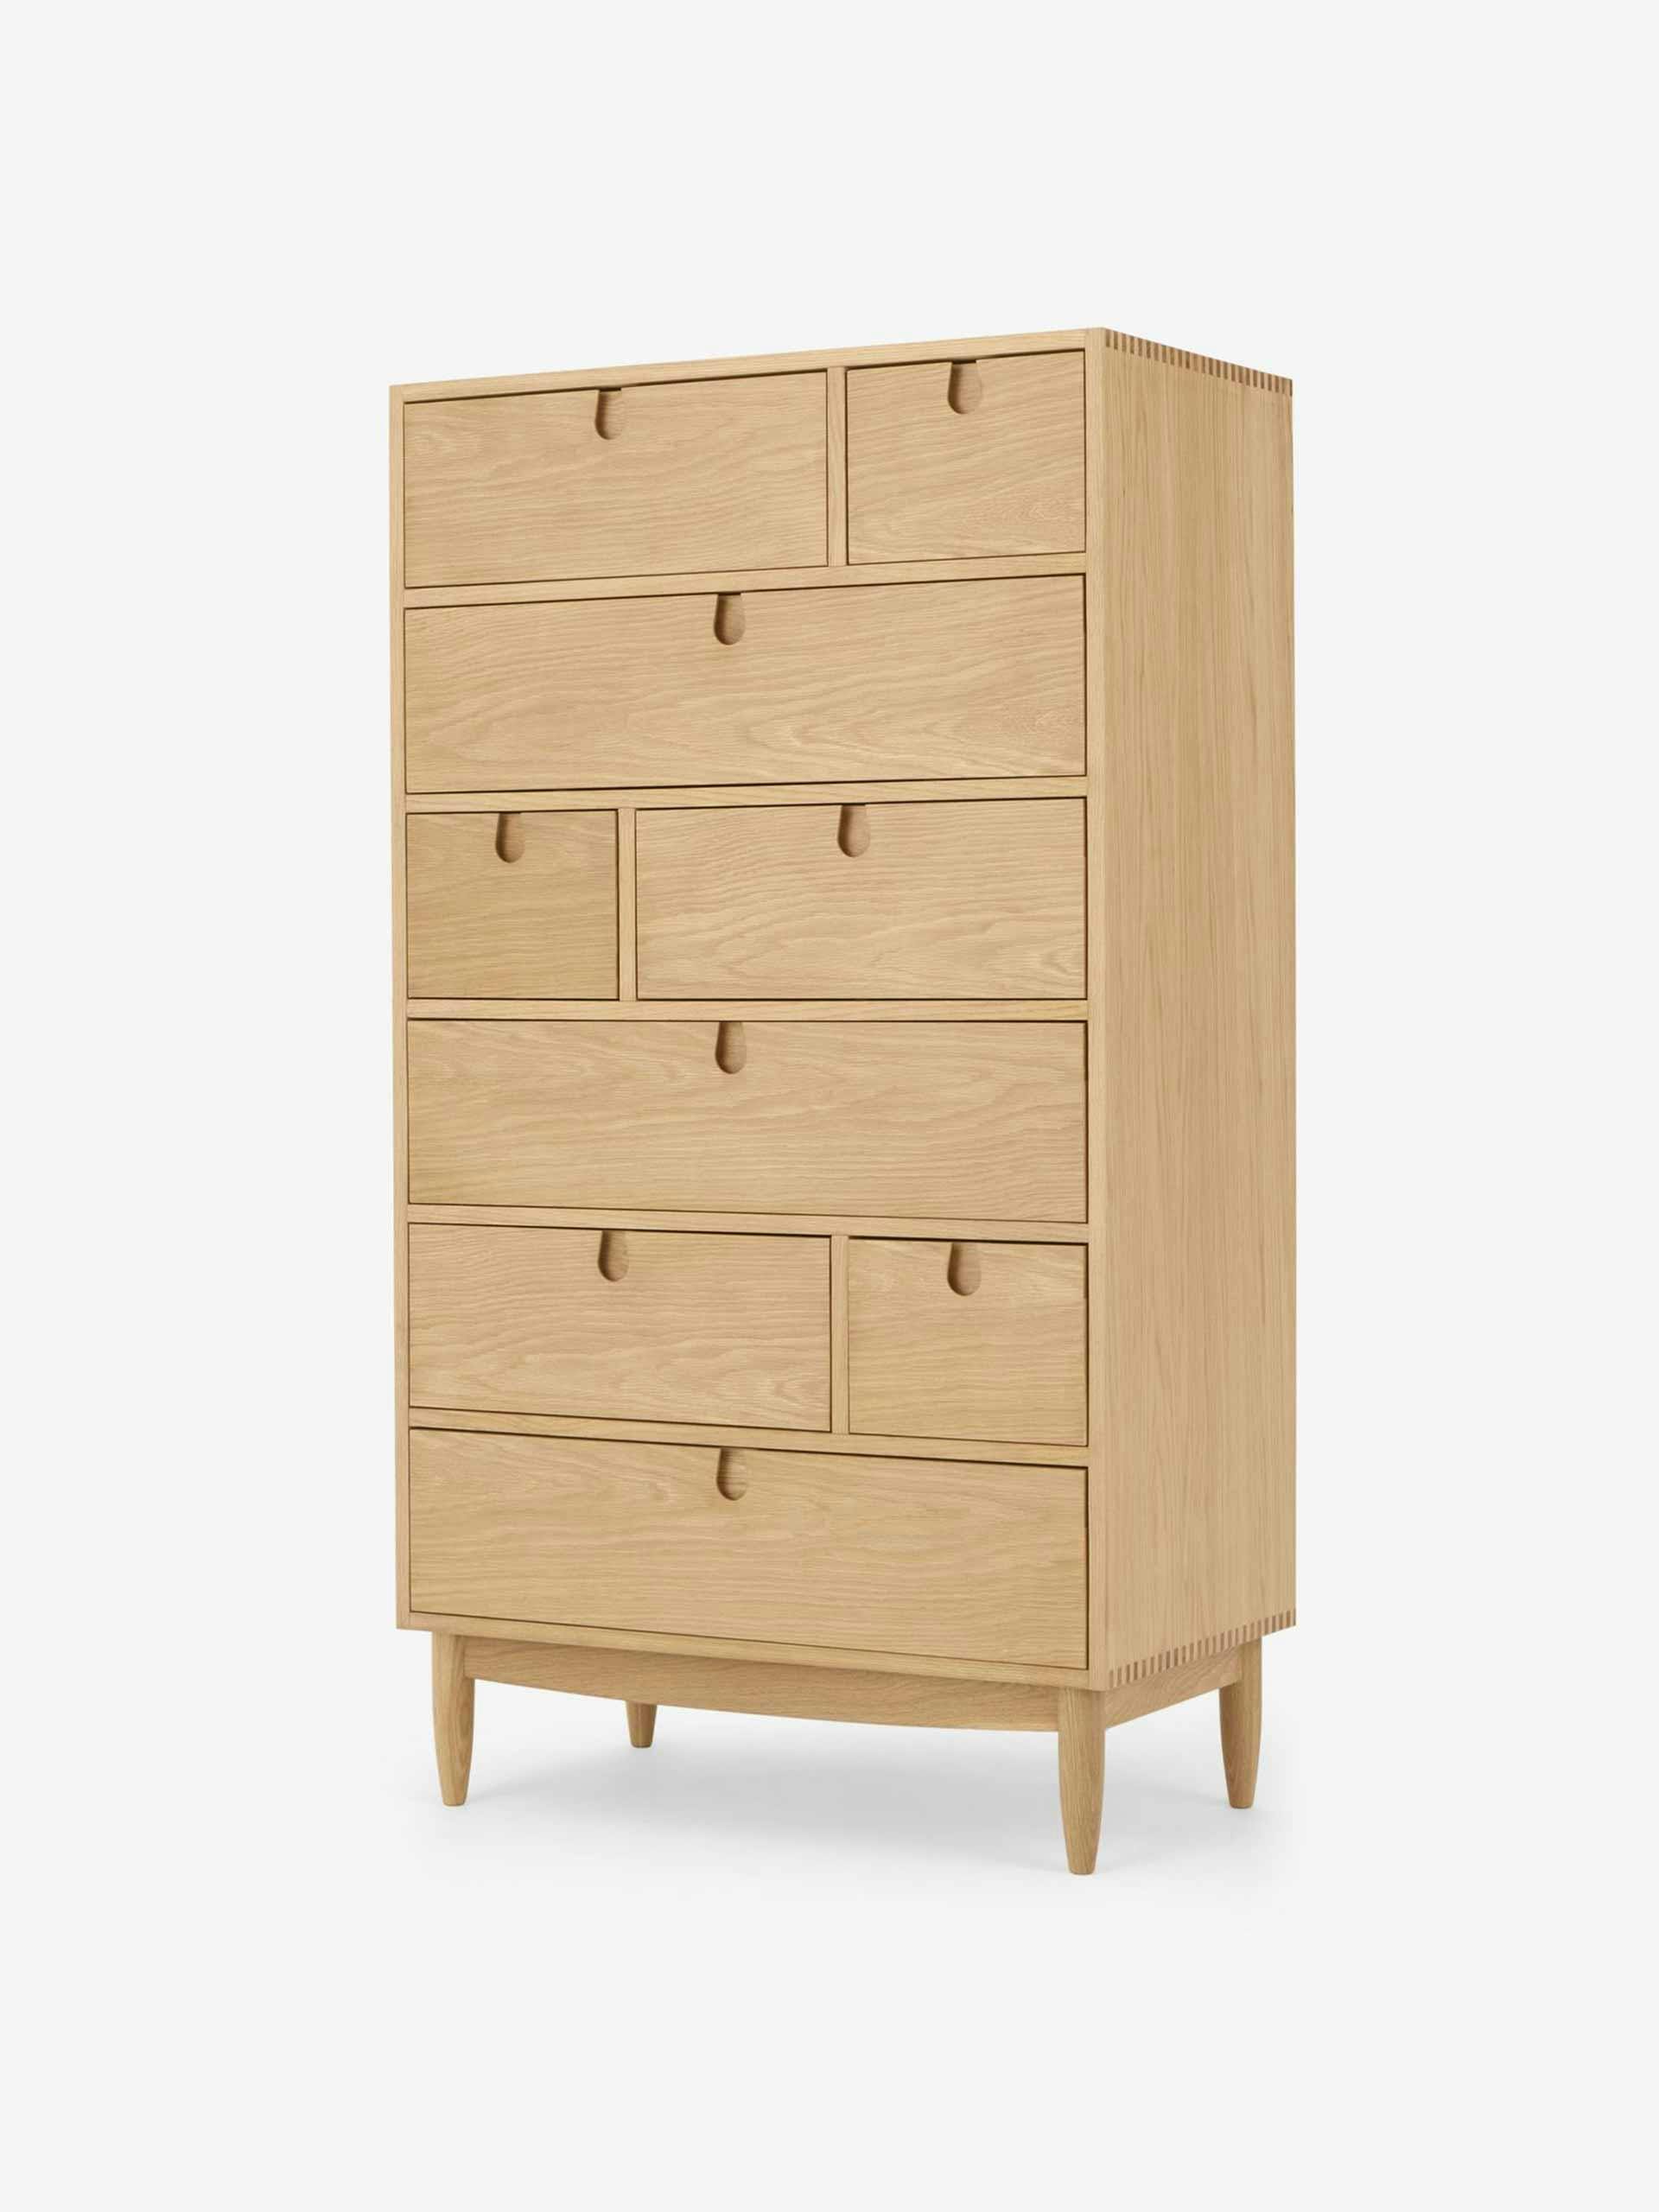 Penn chest of drawers